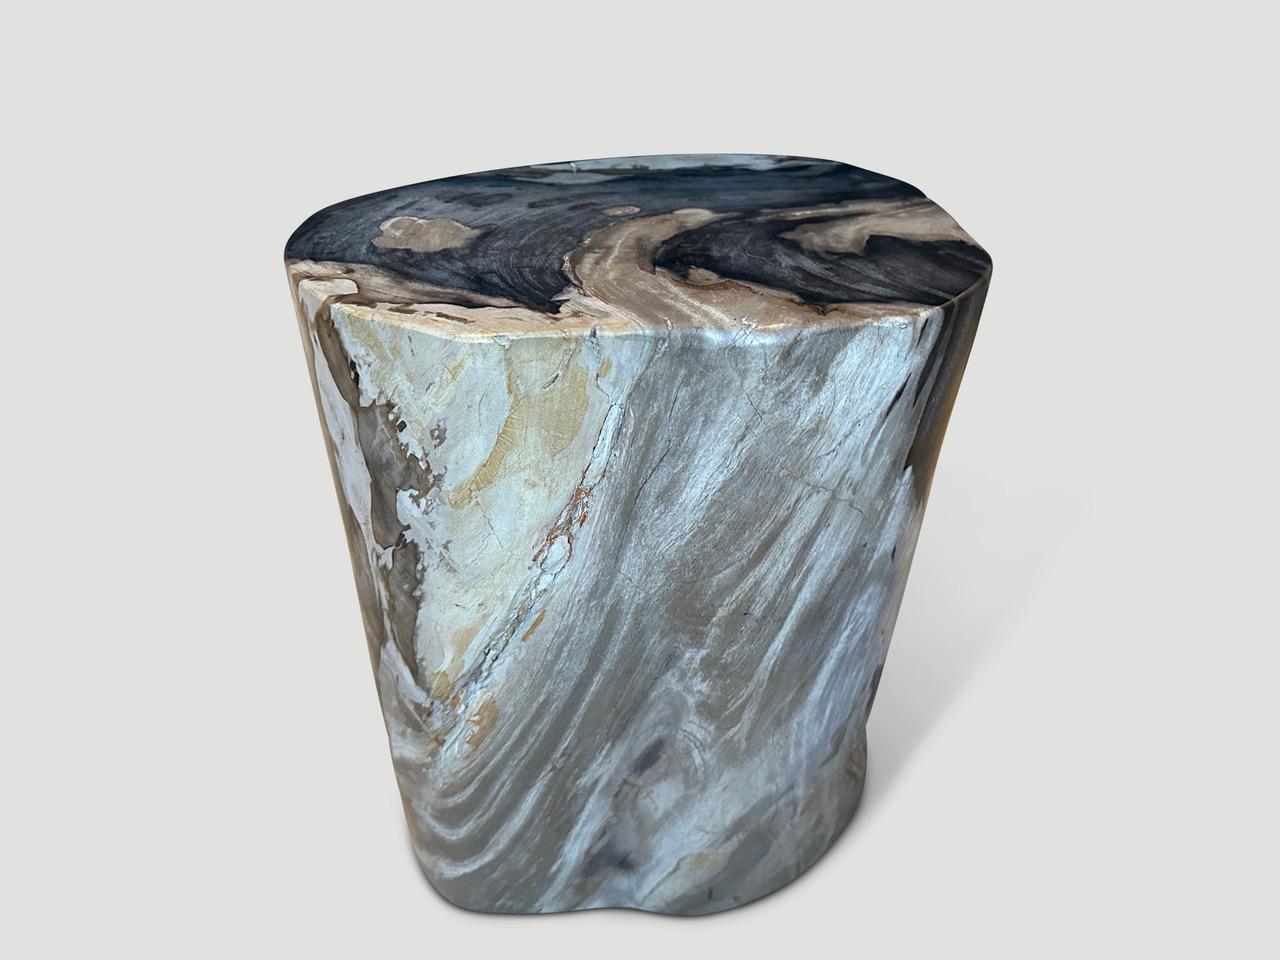 Beautiful petrified wood side table with fabulous contrasting markings and grey, blue tones.  It’s fascinating how Mother Nature produces these stunning 40 million year old petrified teak logs with such contrasting colors and natural patterns